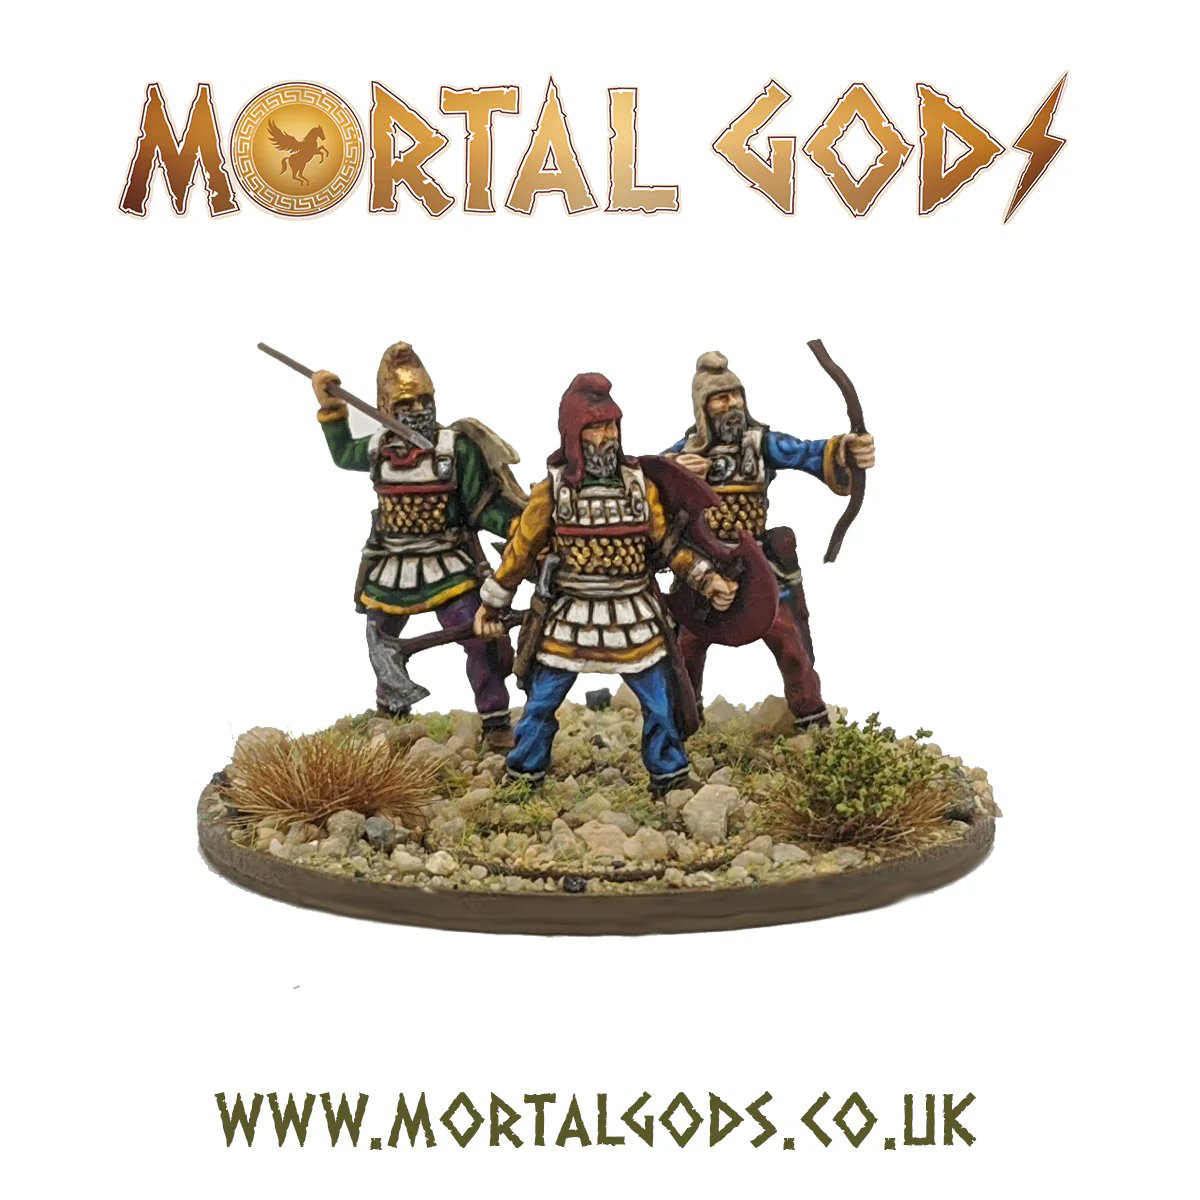 •Persian Immortals•
The elite of a Persian Army often formed from elites
fsminis.link/fi7oxei
#MythicGods #MortalGods #AncientGreece #Greece #Ancients #footsore #footsoreminiatures #SPG #wargaming #warmongers #gaming #minwargaming #tabletopgames #miniatures #figures